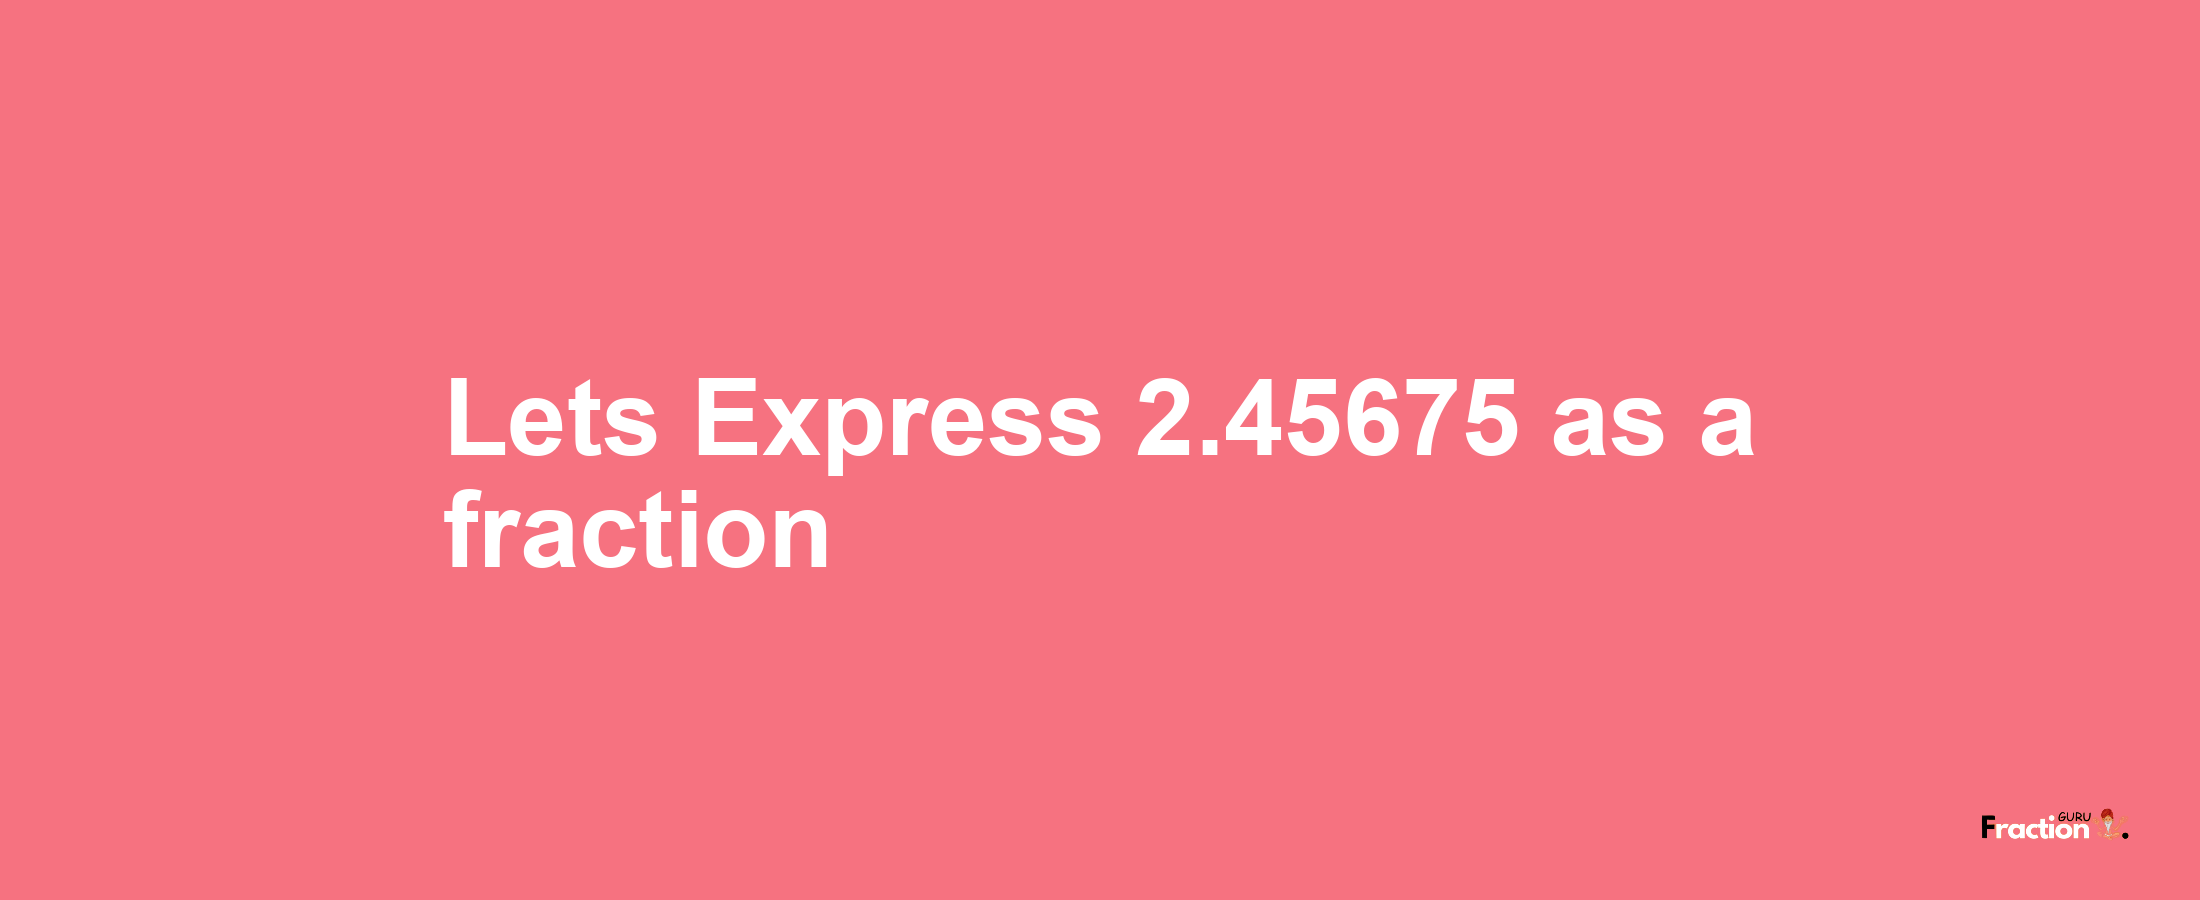 Lets Express 2.45675 as afraction